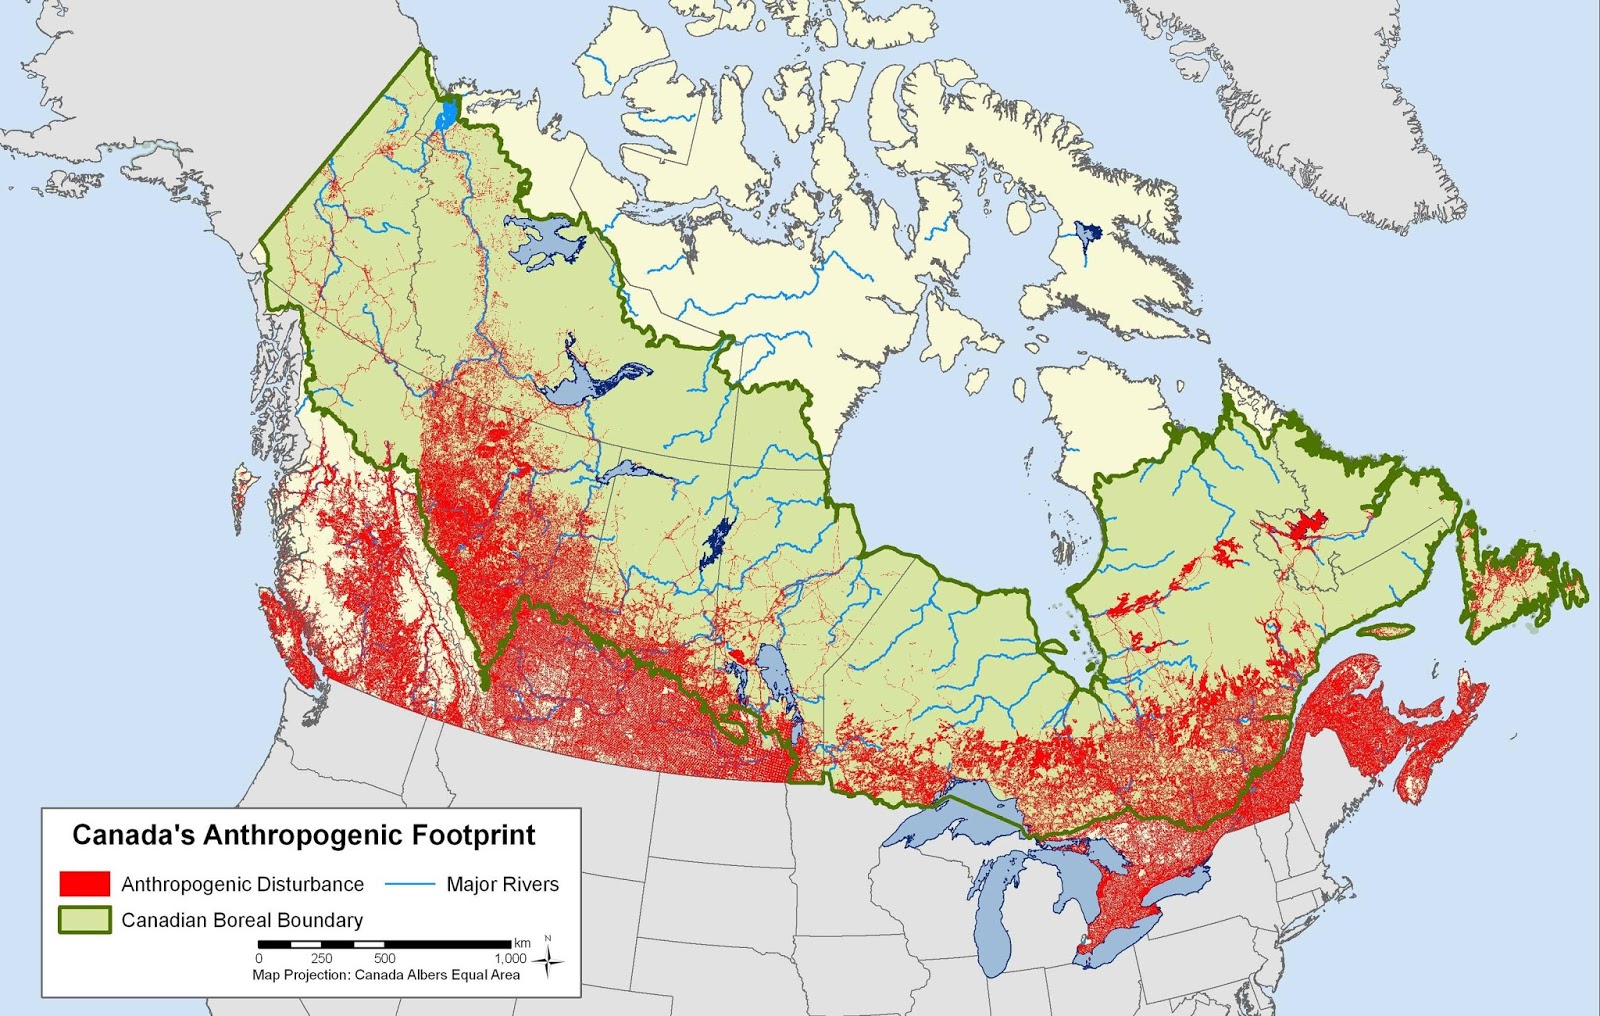 Canada's anthropogenic footprint (everything from roads to reservoirs)